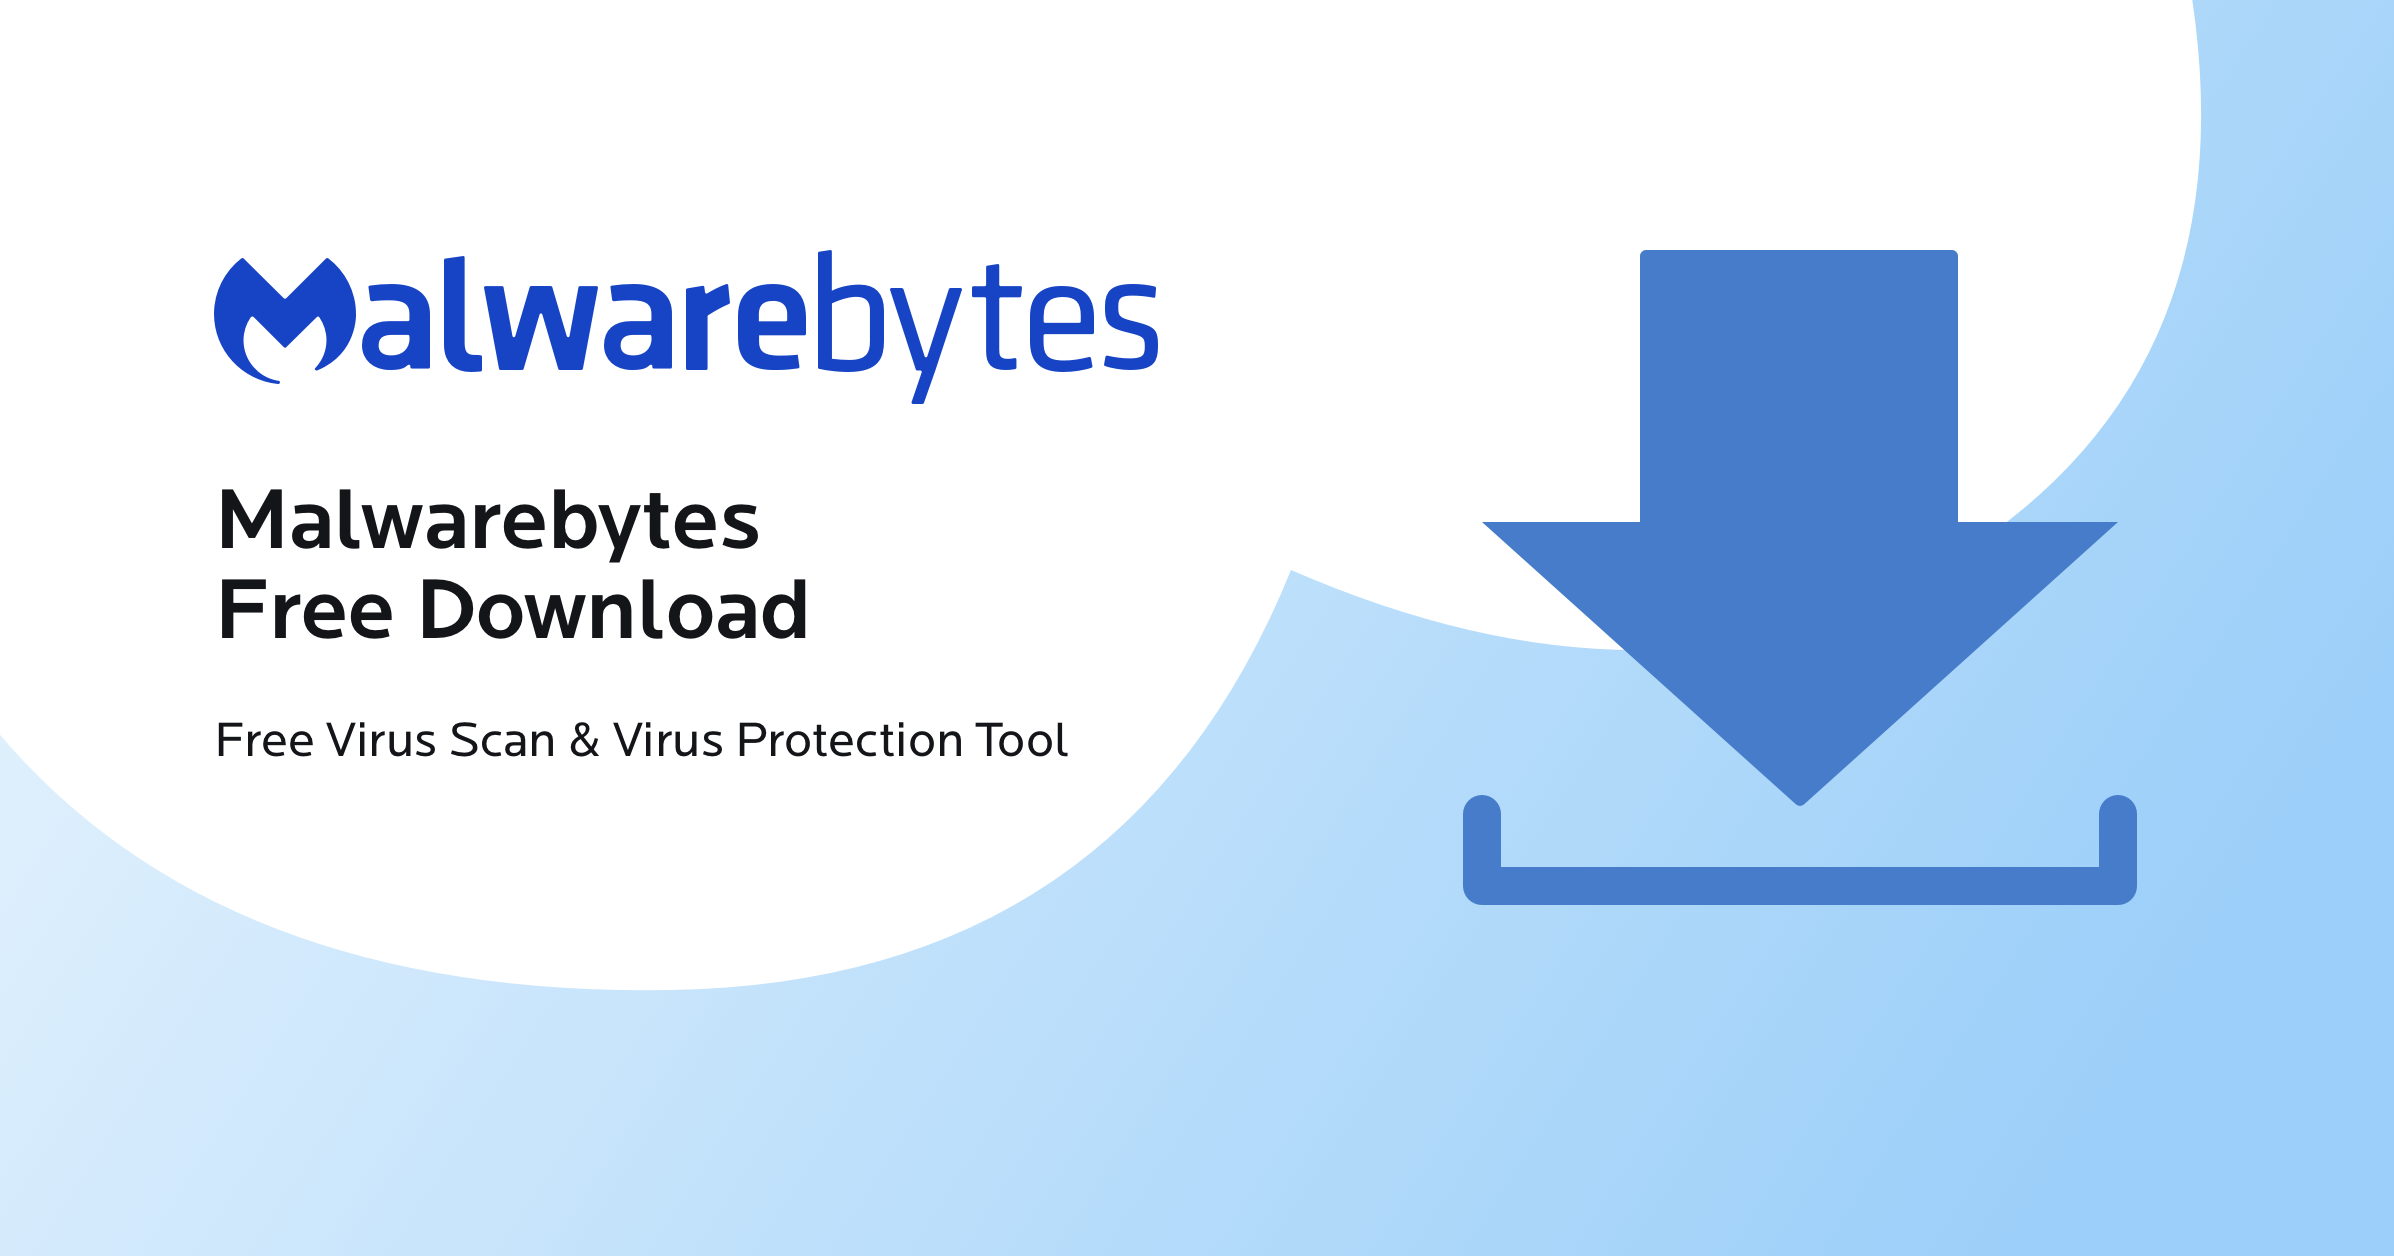 Malwarebytes Anti-Malware: A powerful tool for detecting and removing malware, including the King Kong Exe.
Avast Antivirus: Offers comprehensive protection against viruses and can help in removing the King Kong Exe.